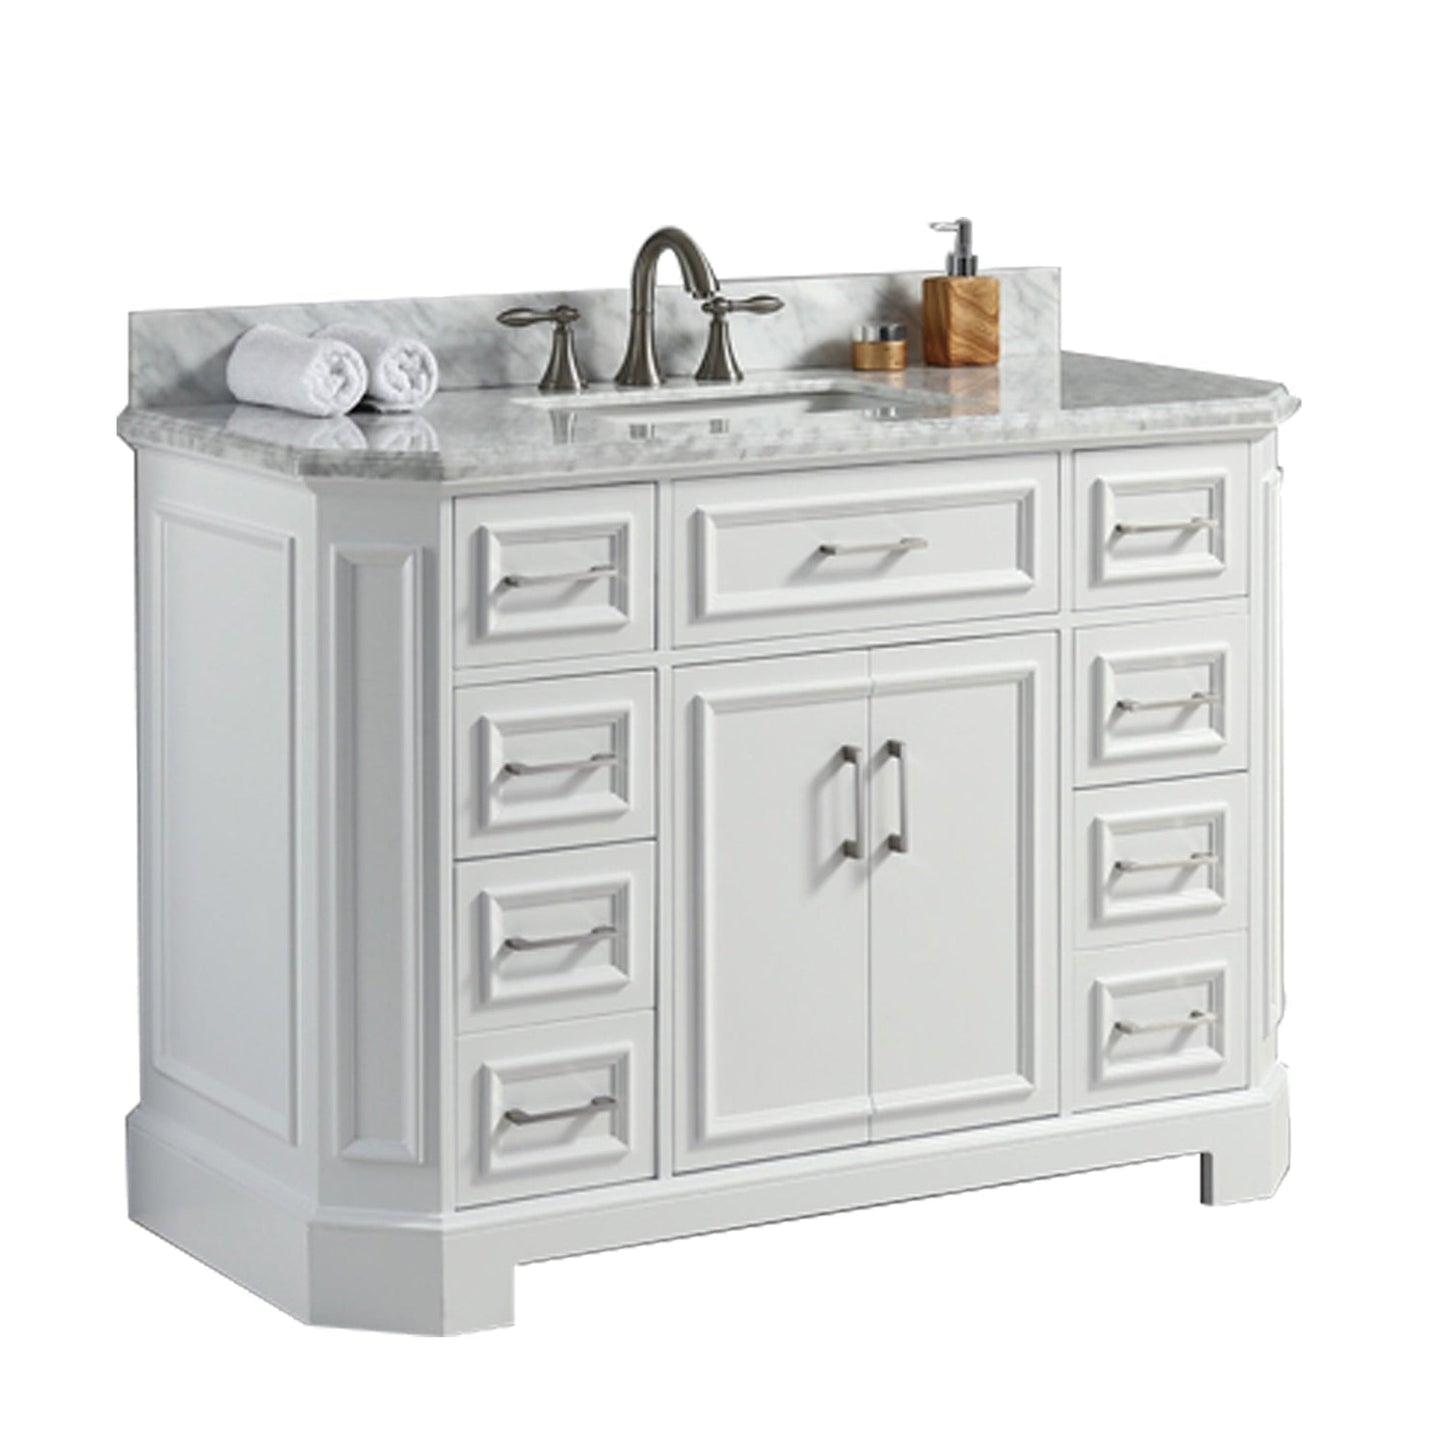 Eviva Glory 48" x 33" White Bathroom Vanity With Carrara Marble Countertop and Single Porcelain Sink